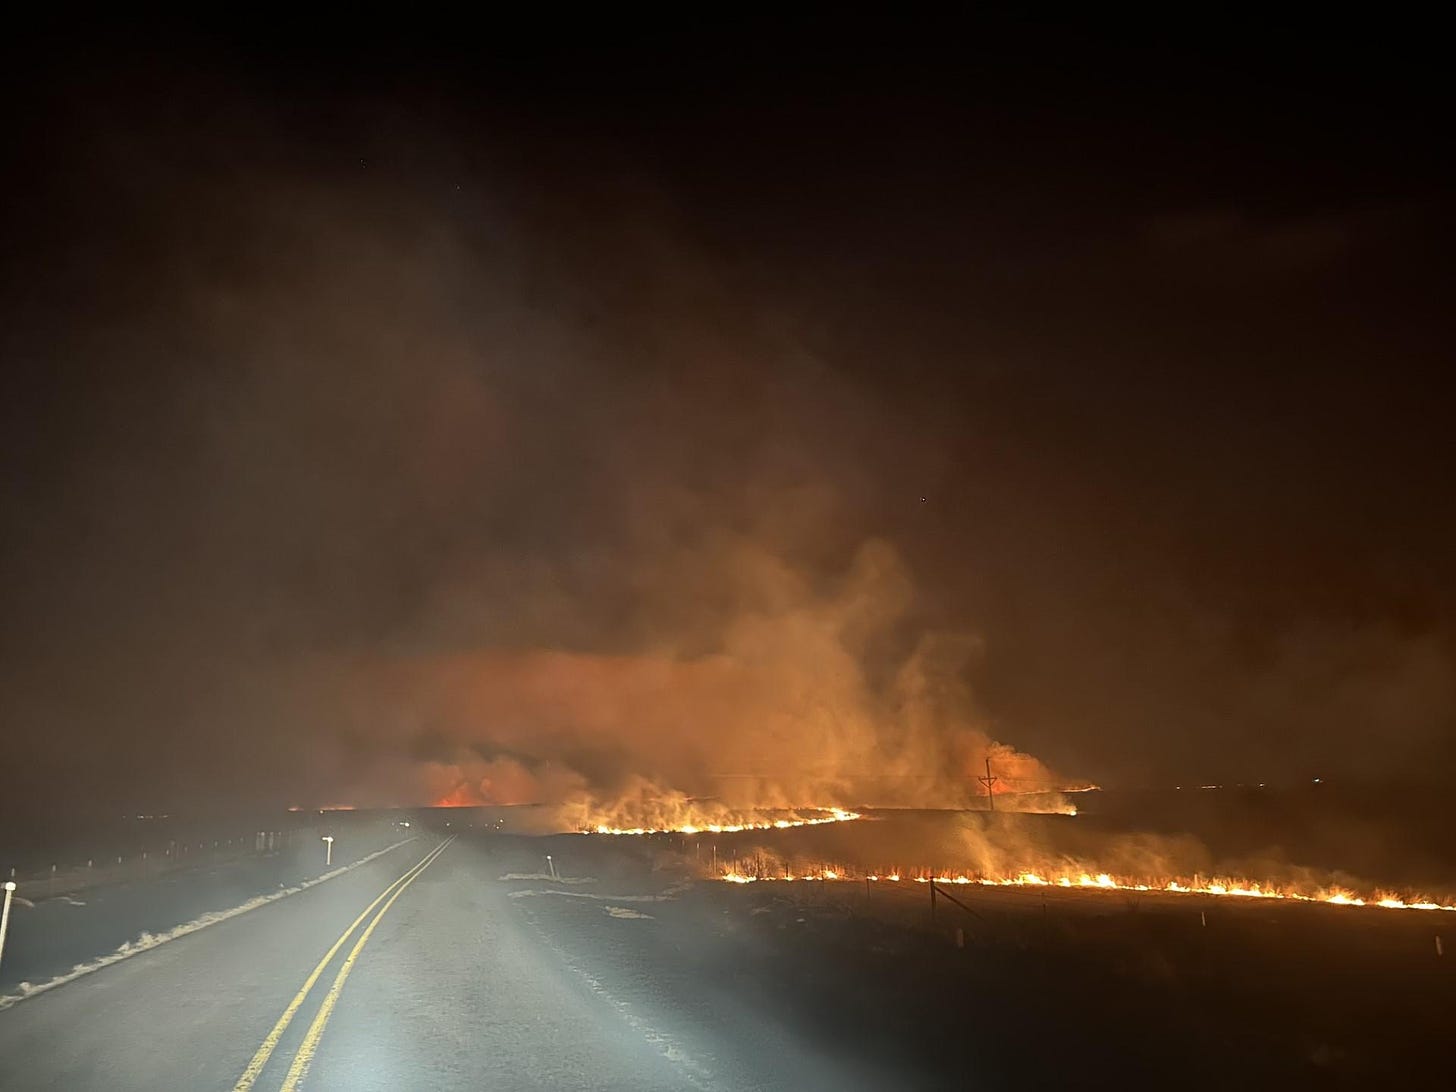 Photo depicts medium sized flames and smoke crossing a two lane road at night.